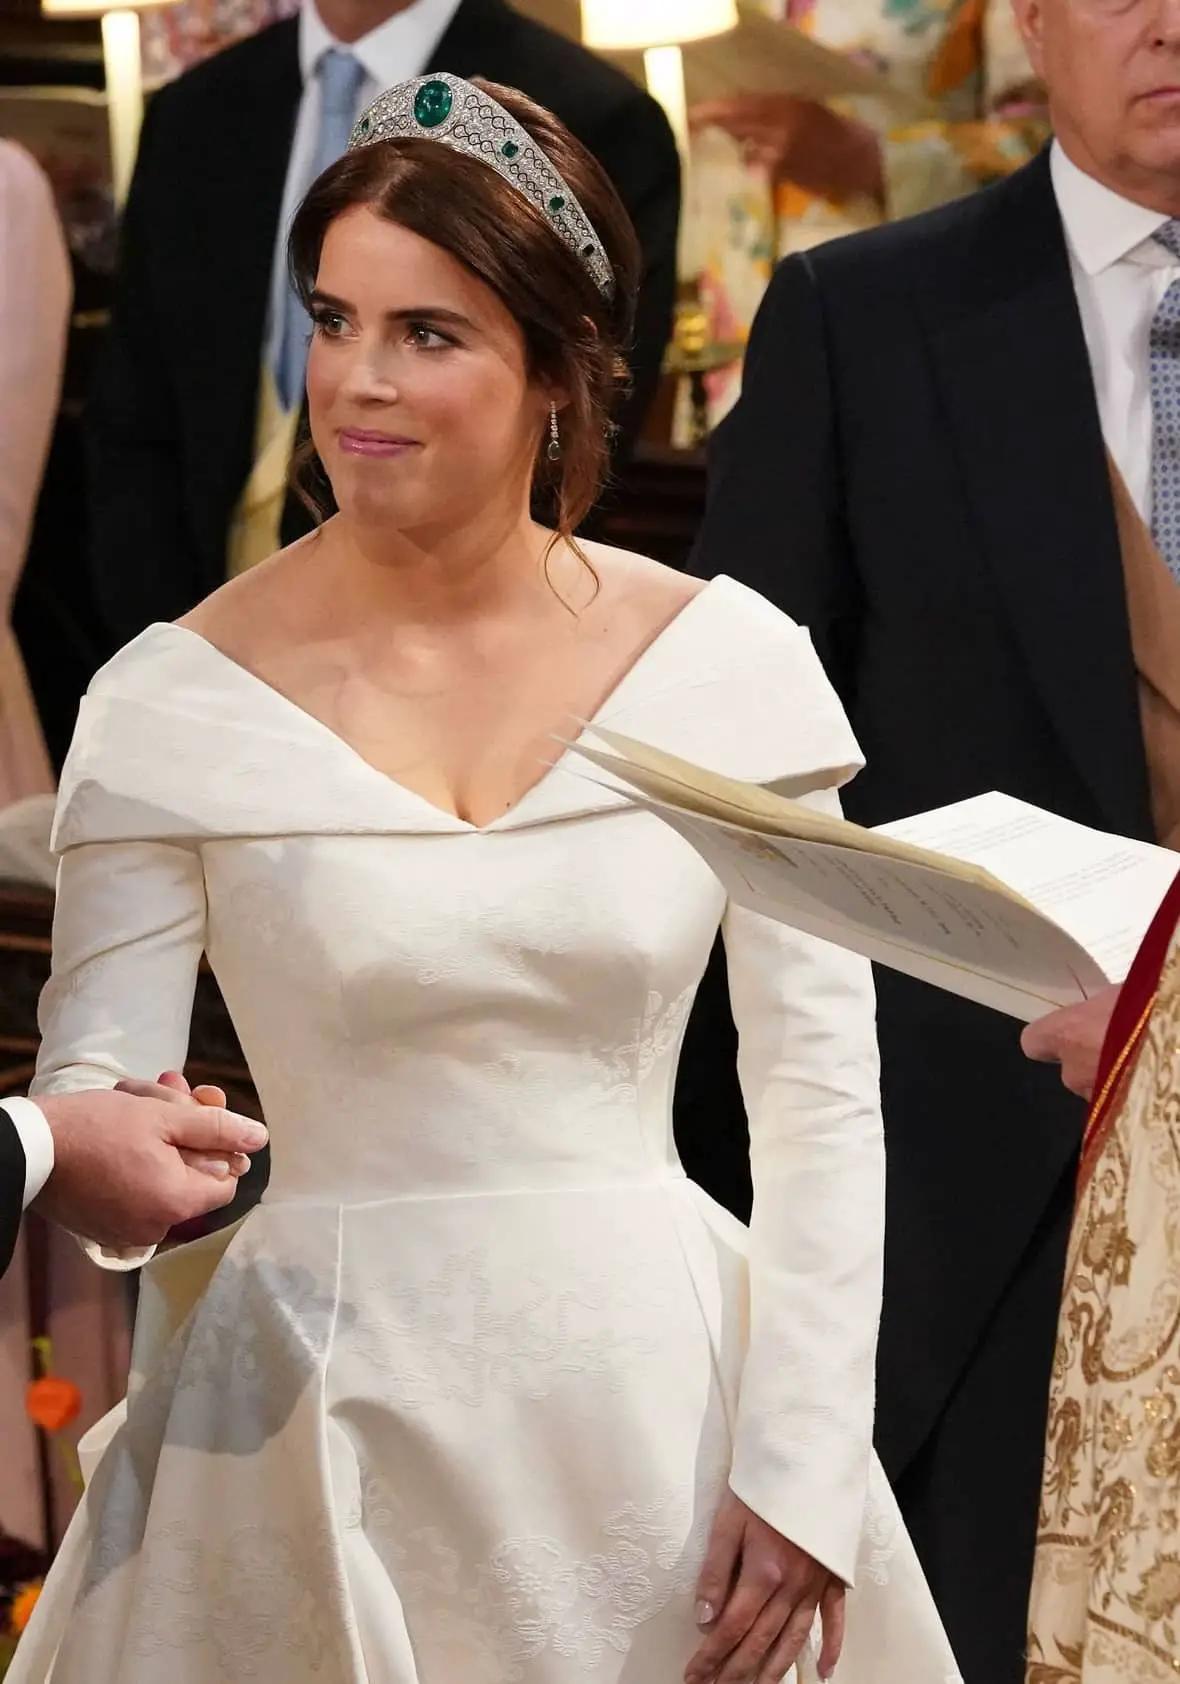 The unexpected regalness and elegance of Princess Eugenie's Wedding Wardrobe